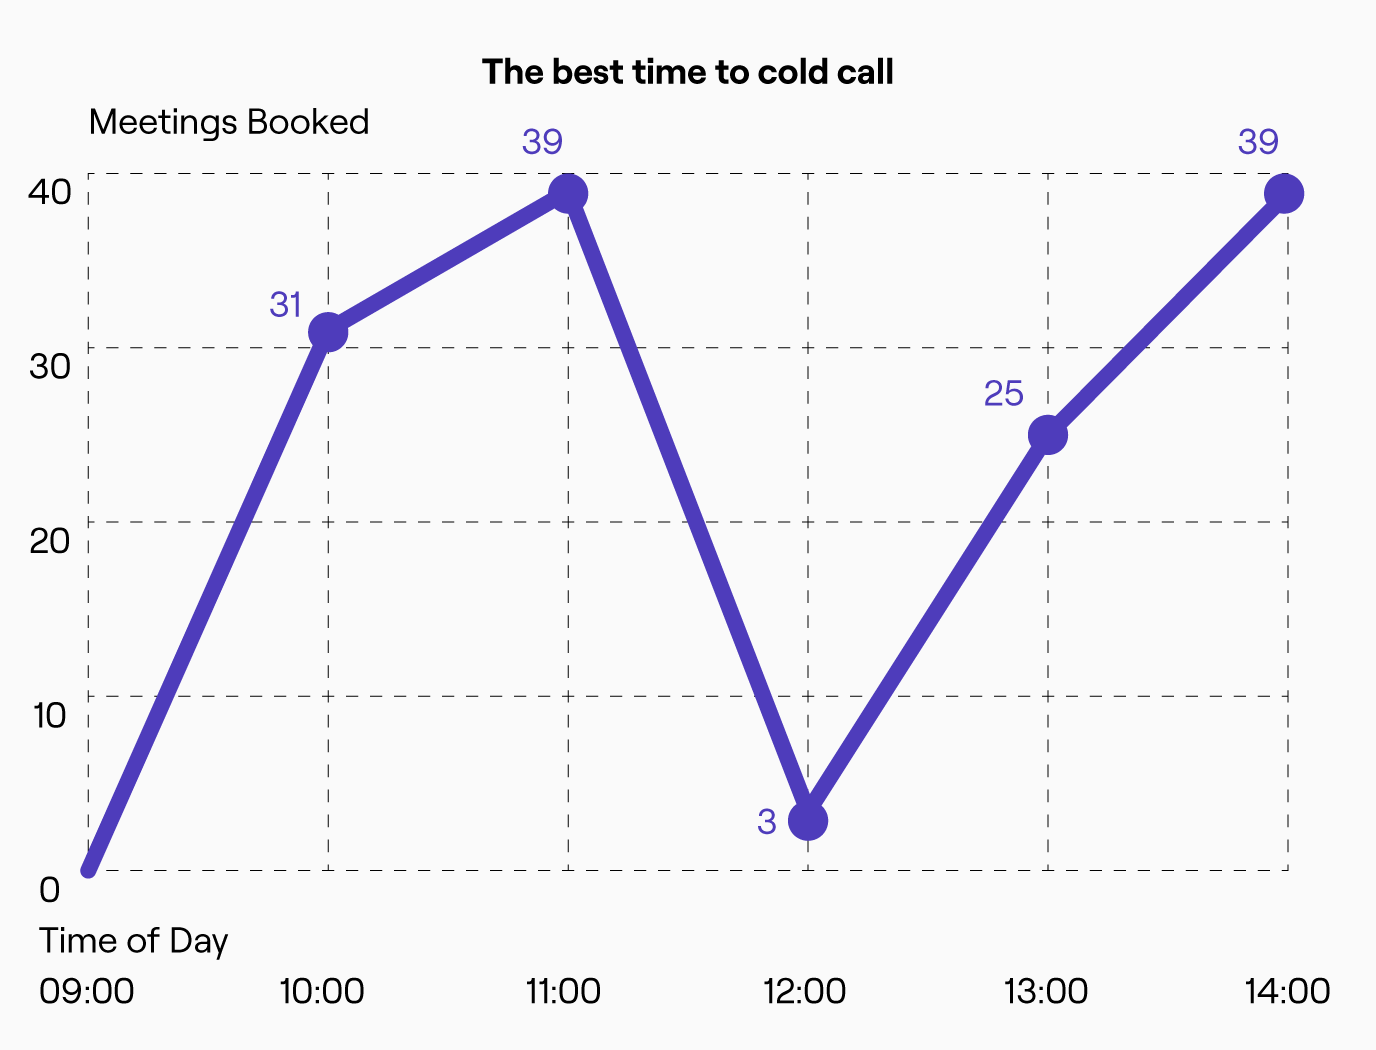 The best time to make a cold call